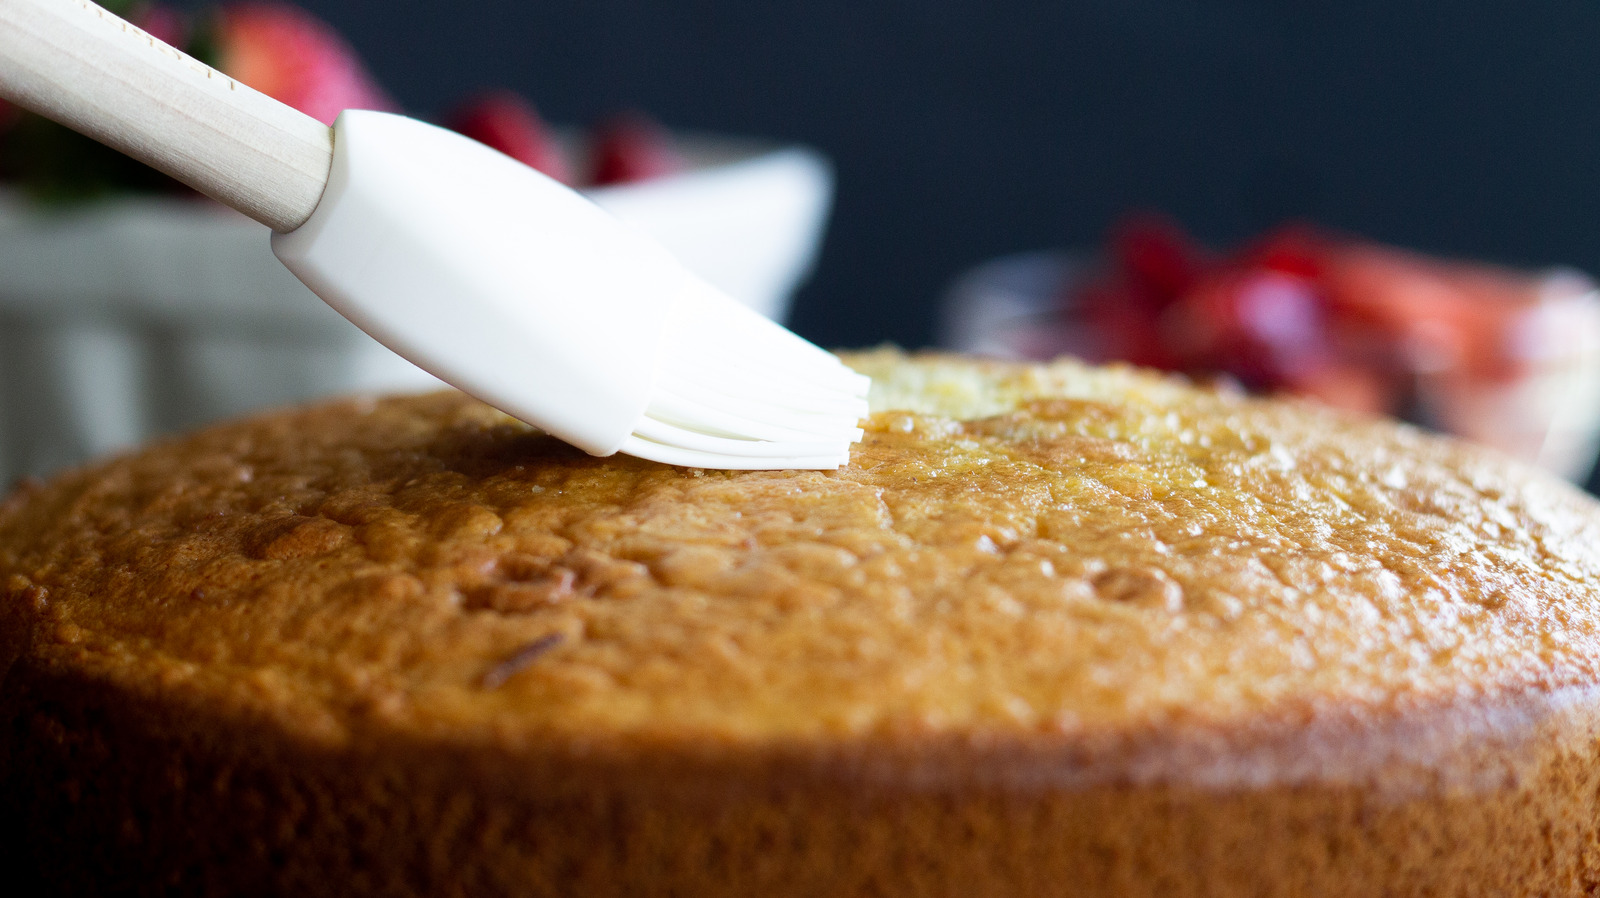 https://www.tastingtable.com/img/gallery/why-you-should-brush-your-cake-with-simple-syrup/l-intro-1660731538.jpg